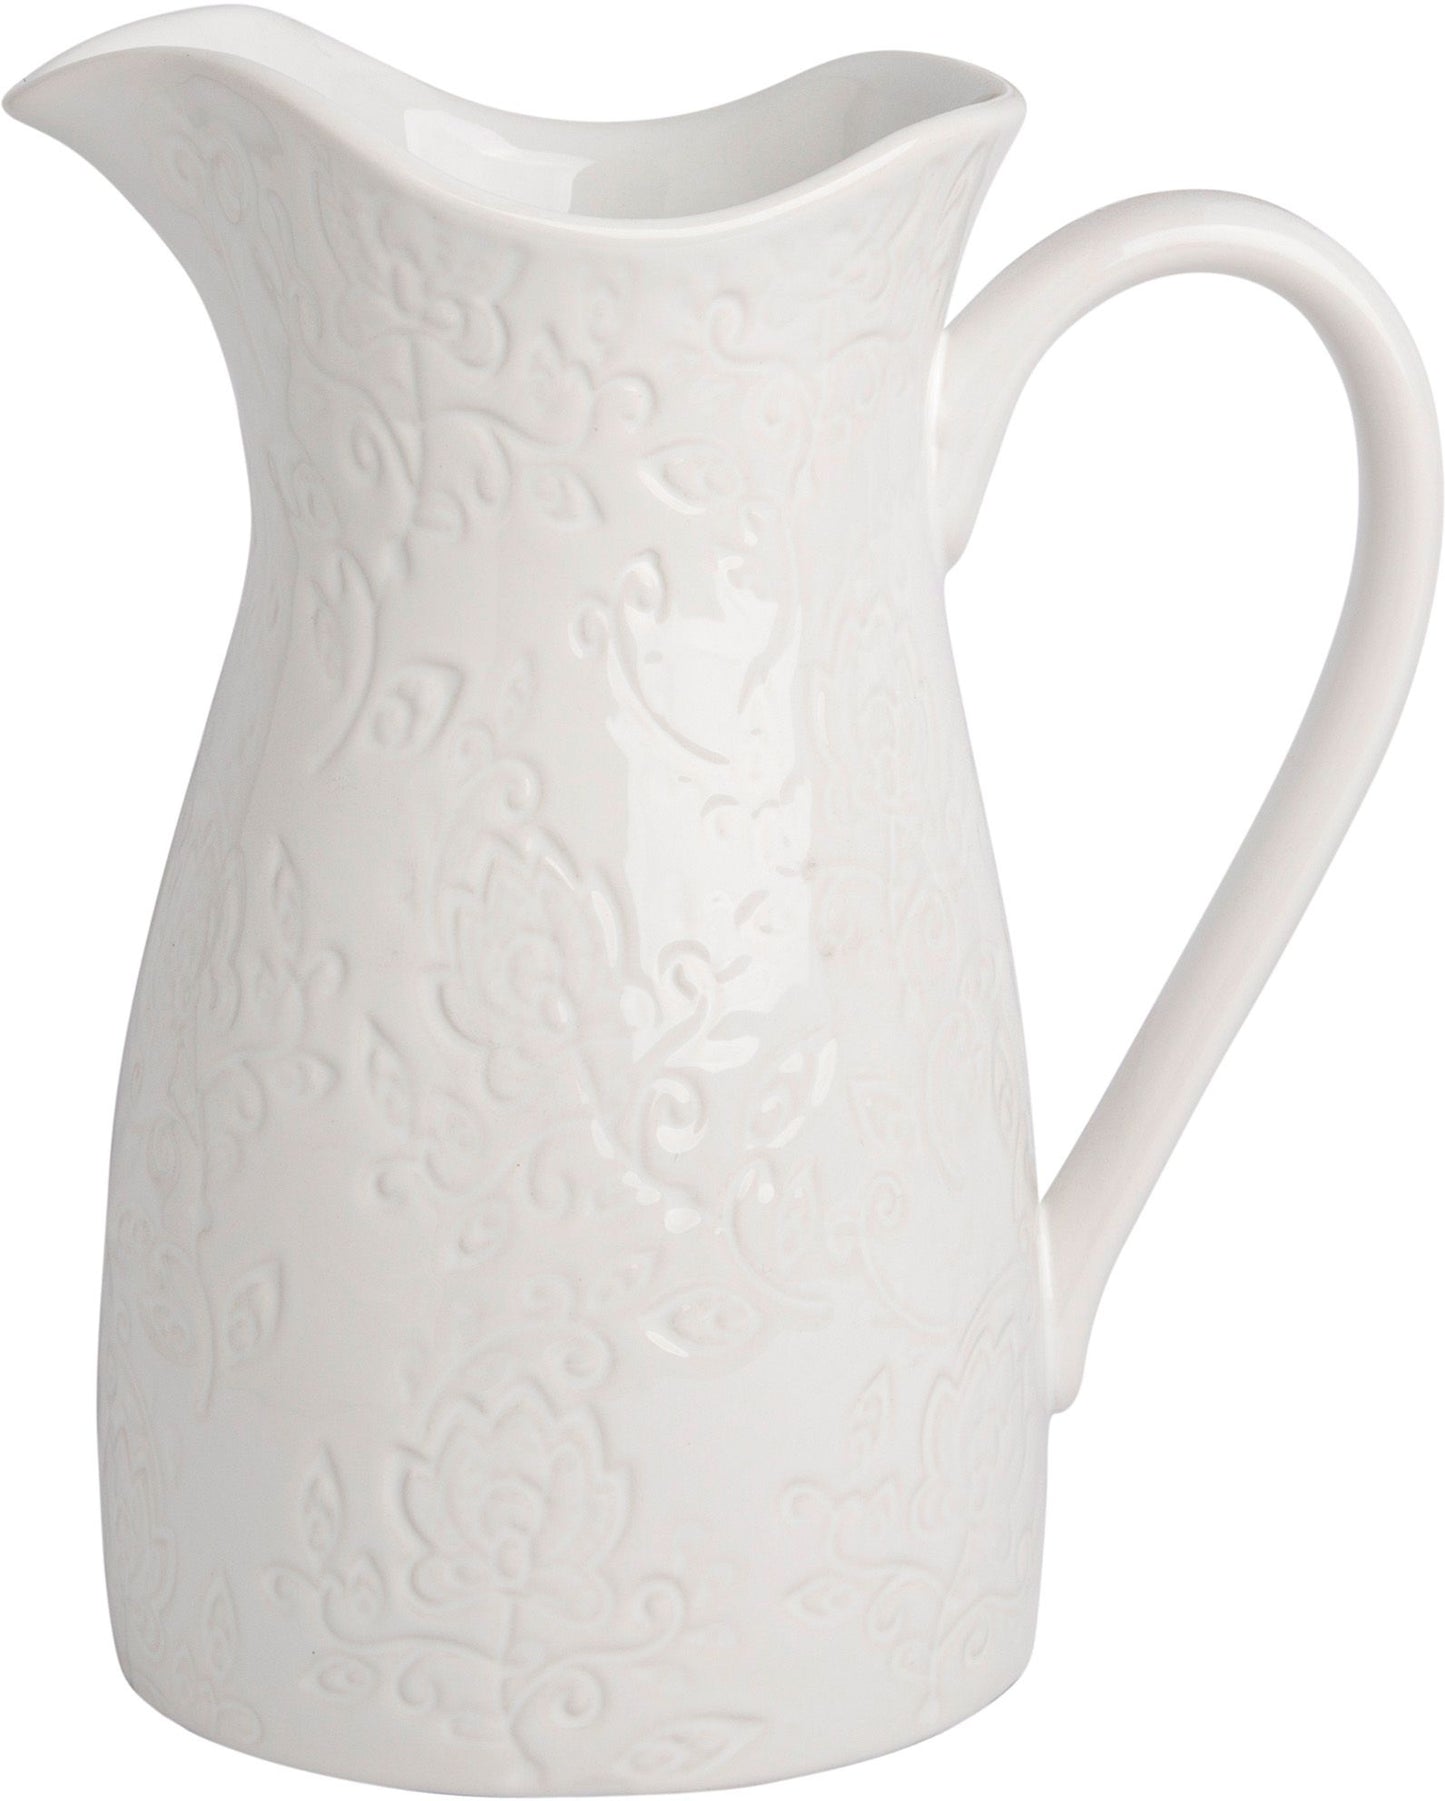 WHITE DEBOSSED FLORAL PITCHER